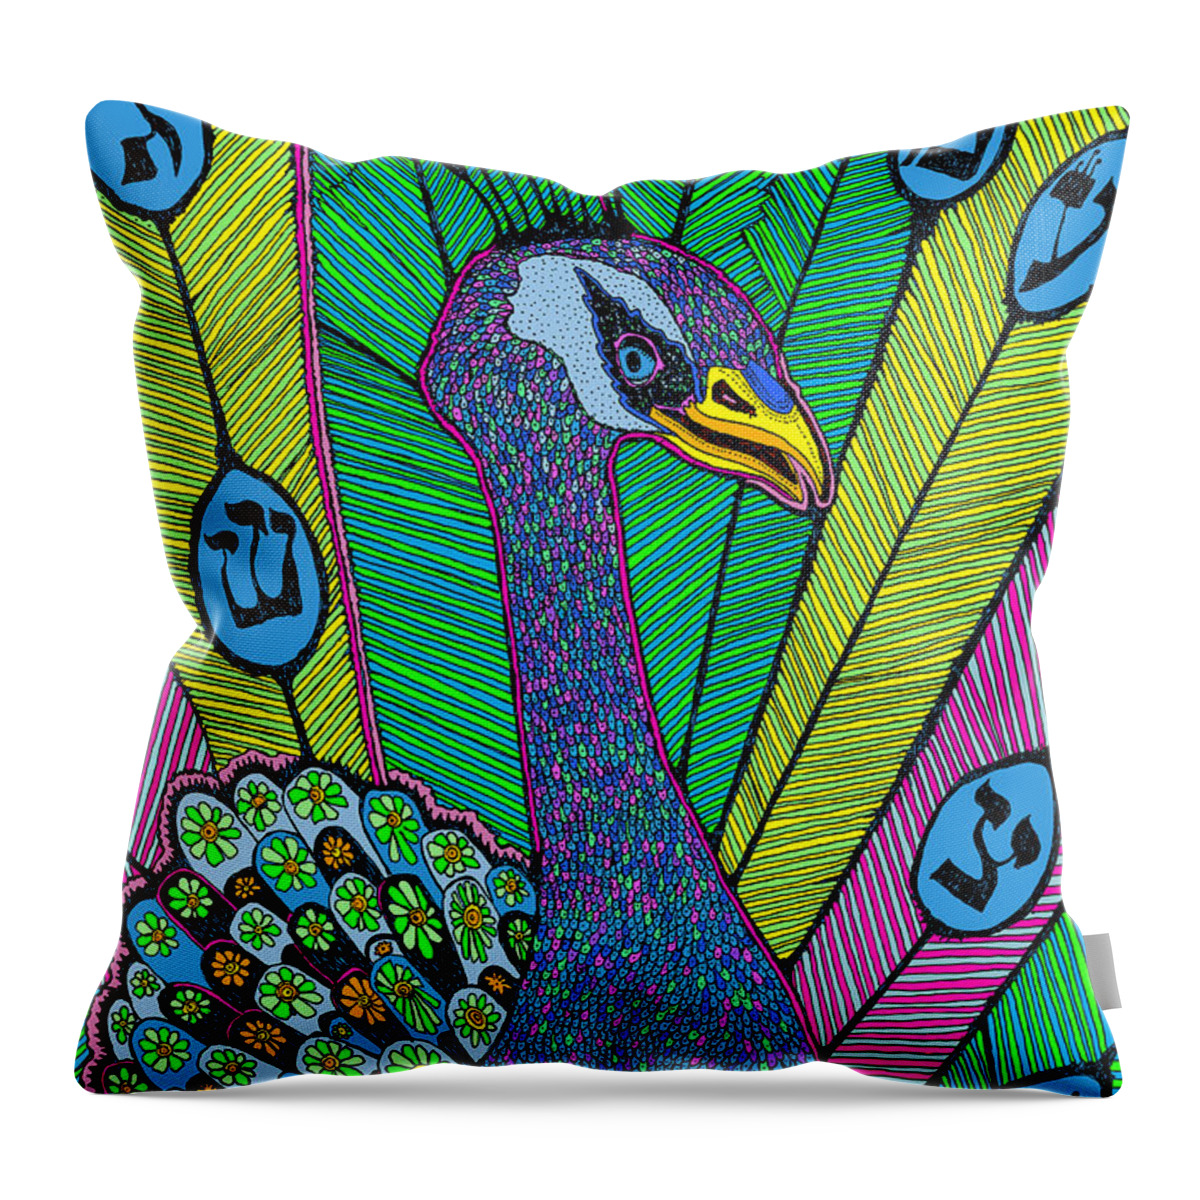 Peacock Throw Pillow featuring the painting Peacock by Yom Tov Blumenthal